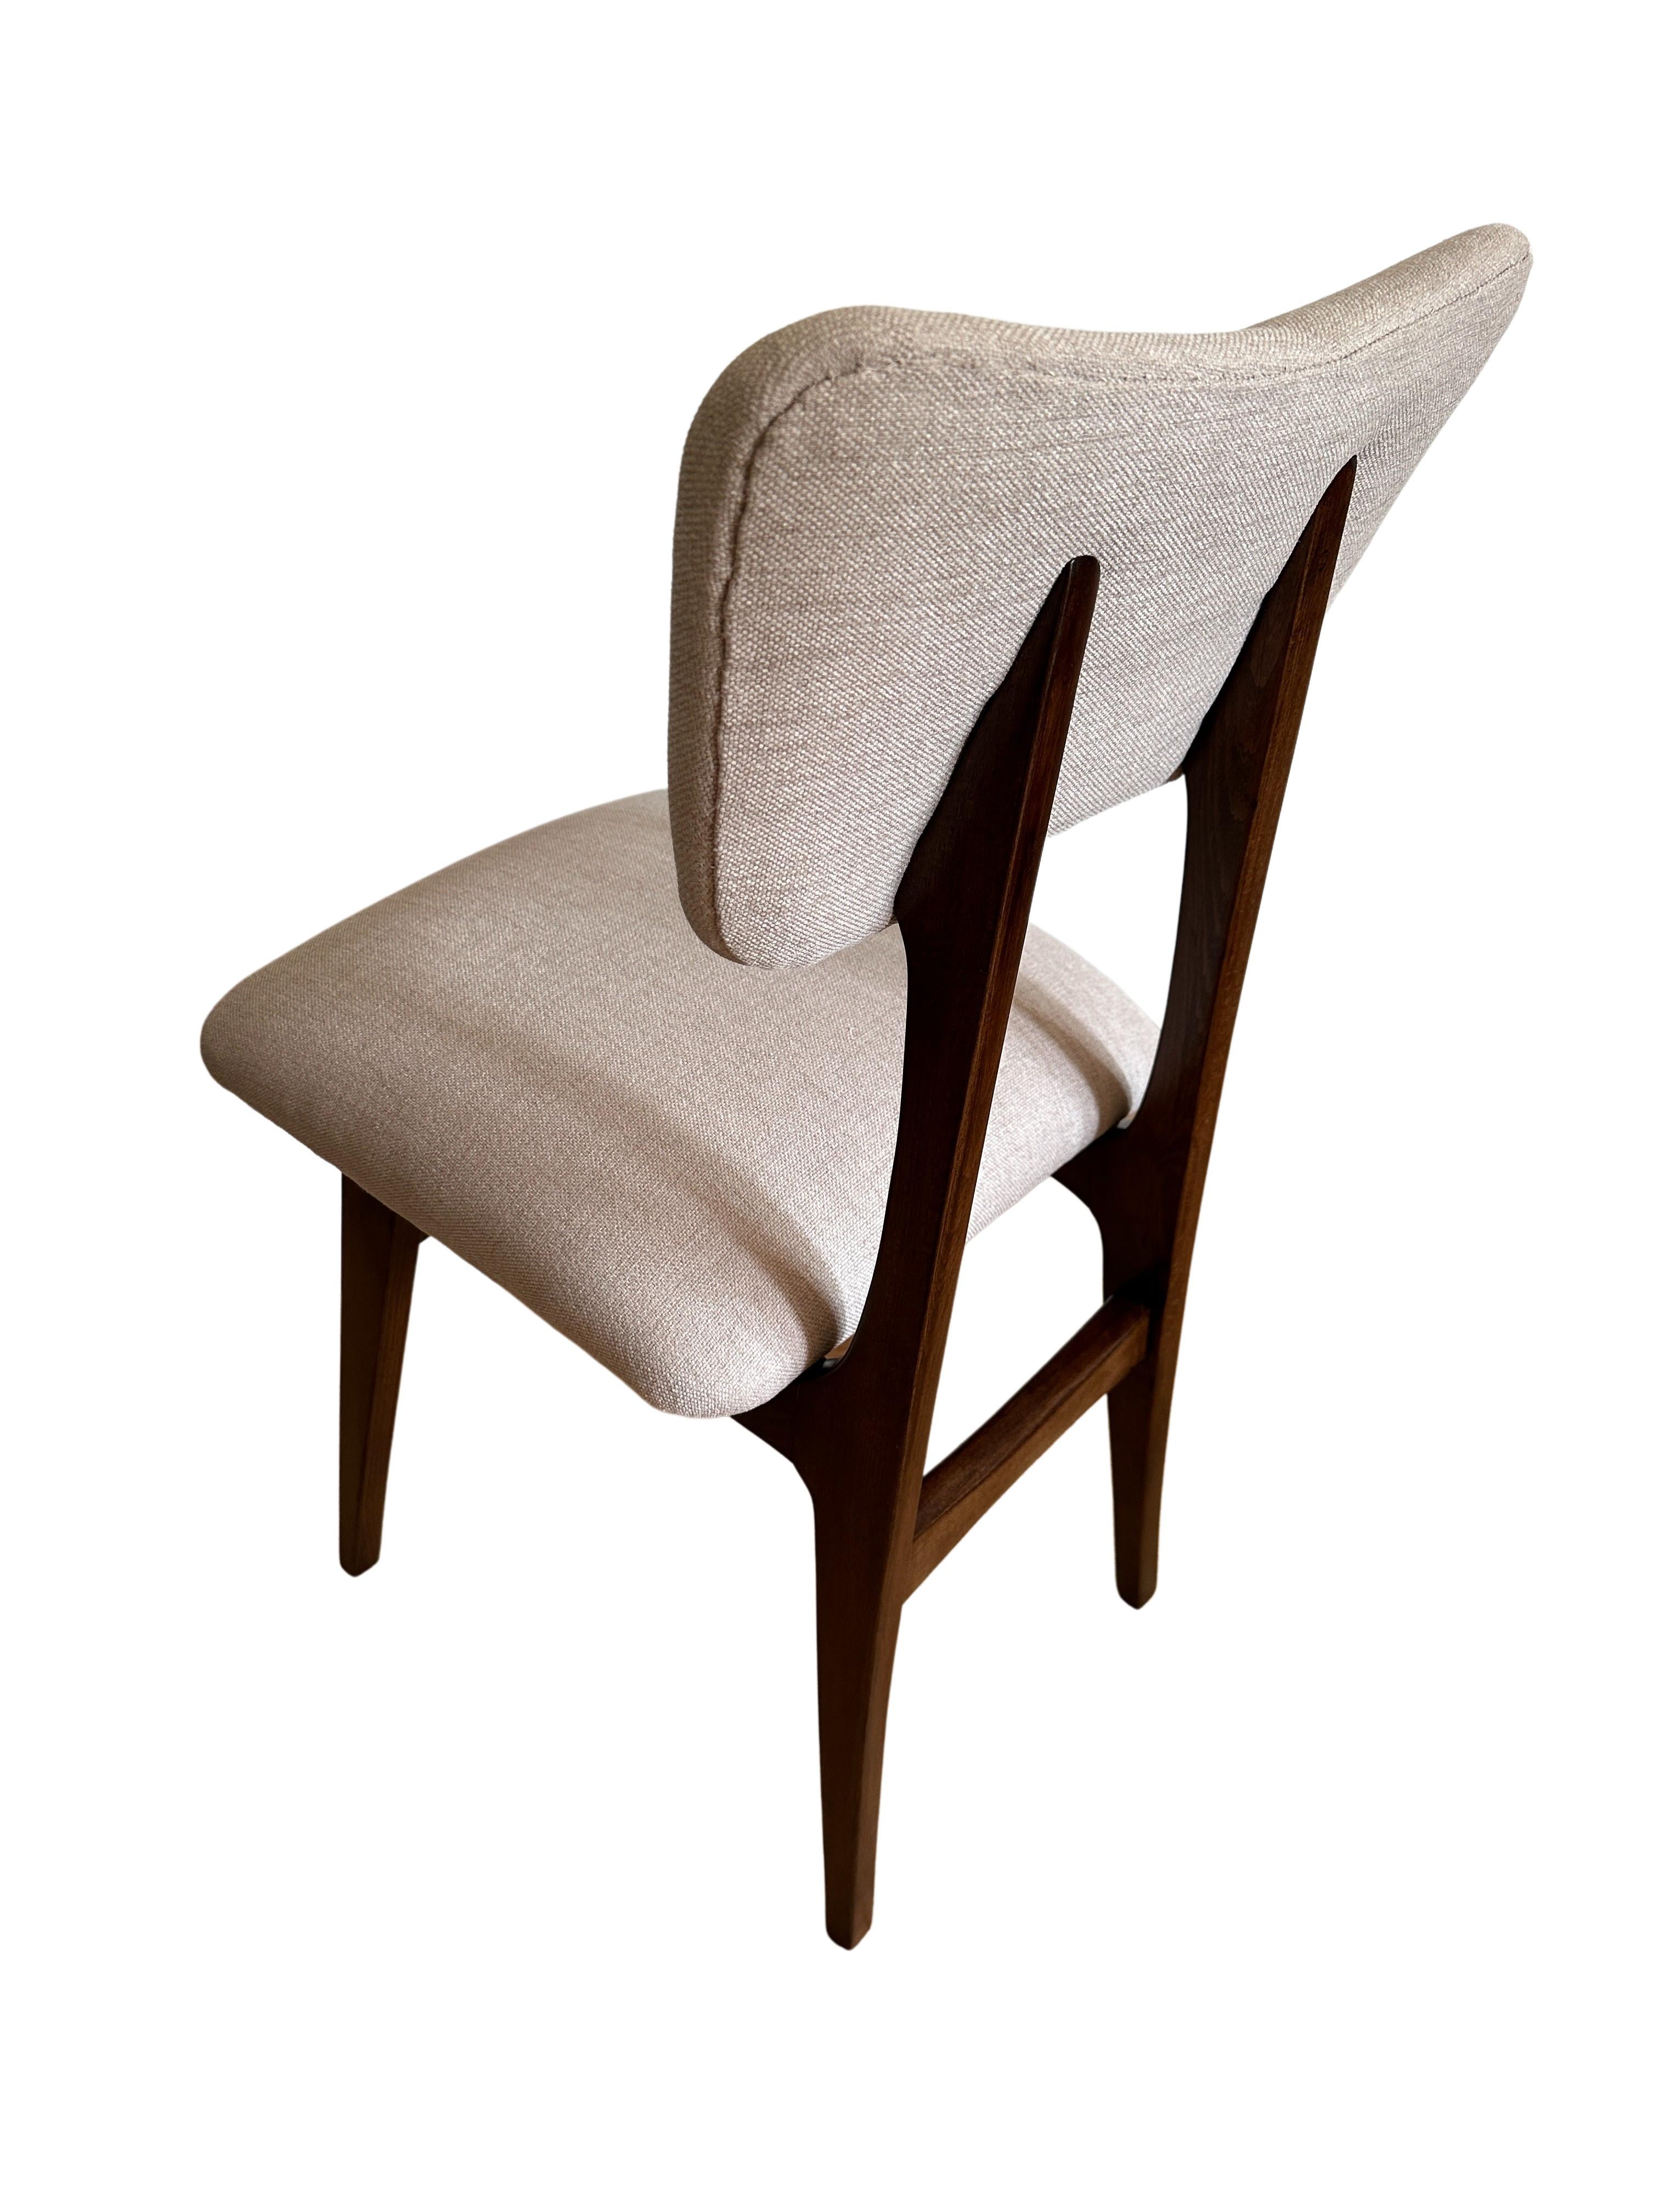 Bouclé Set of 6 Midcentury Beige Dining Chairs, Europe, 1960s For Sale